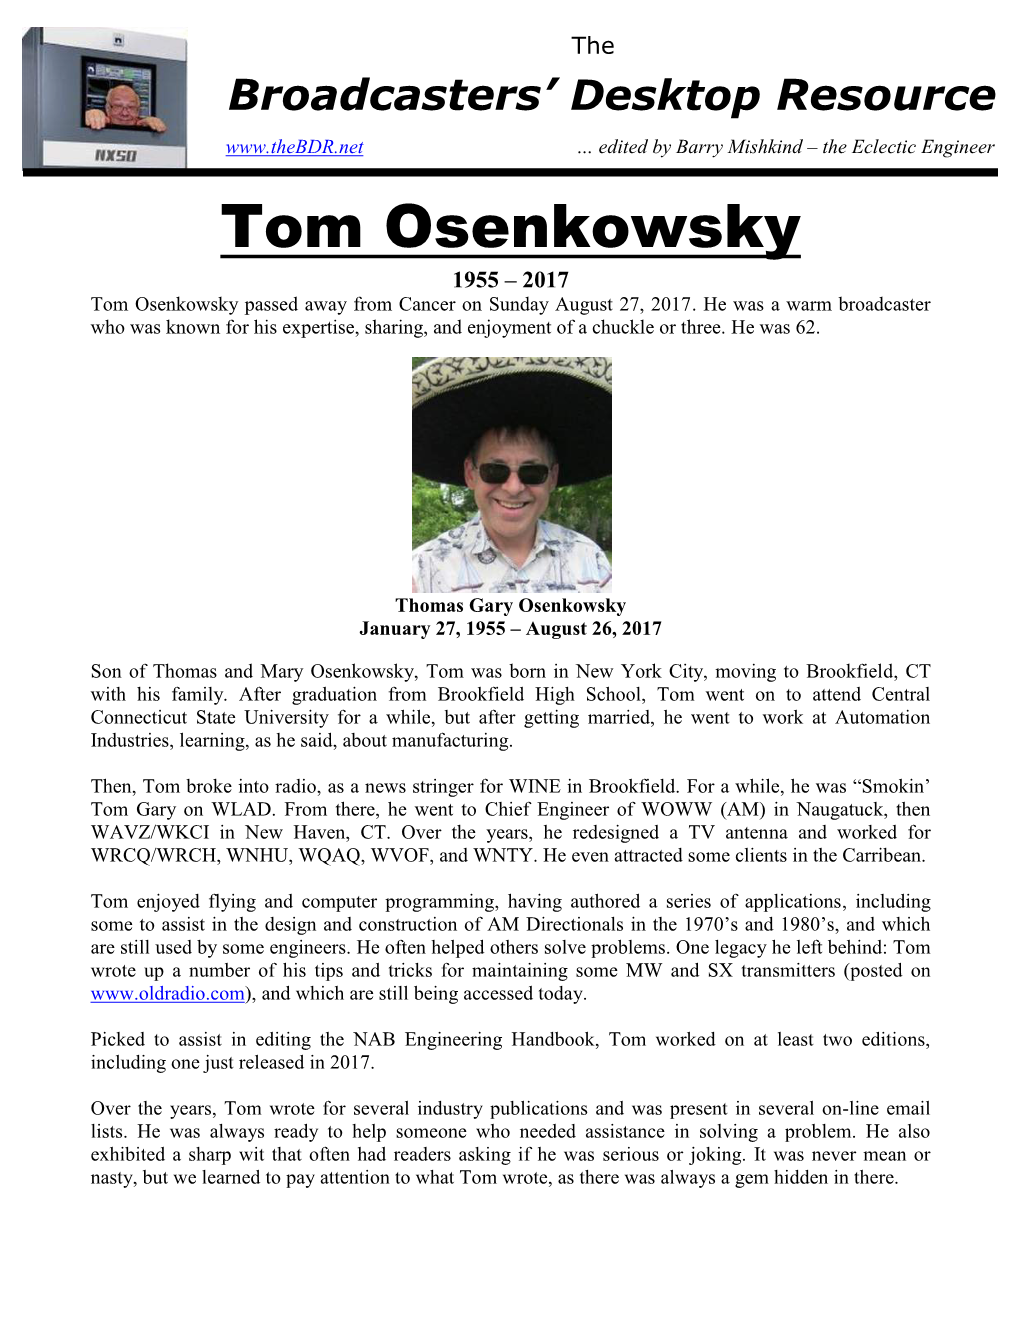 Tom Osenkowsky 1955 – 2017 Tom Osenkowsky Passed Away from Cancer on Sunday August 27, 2017